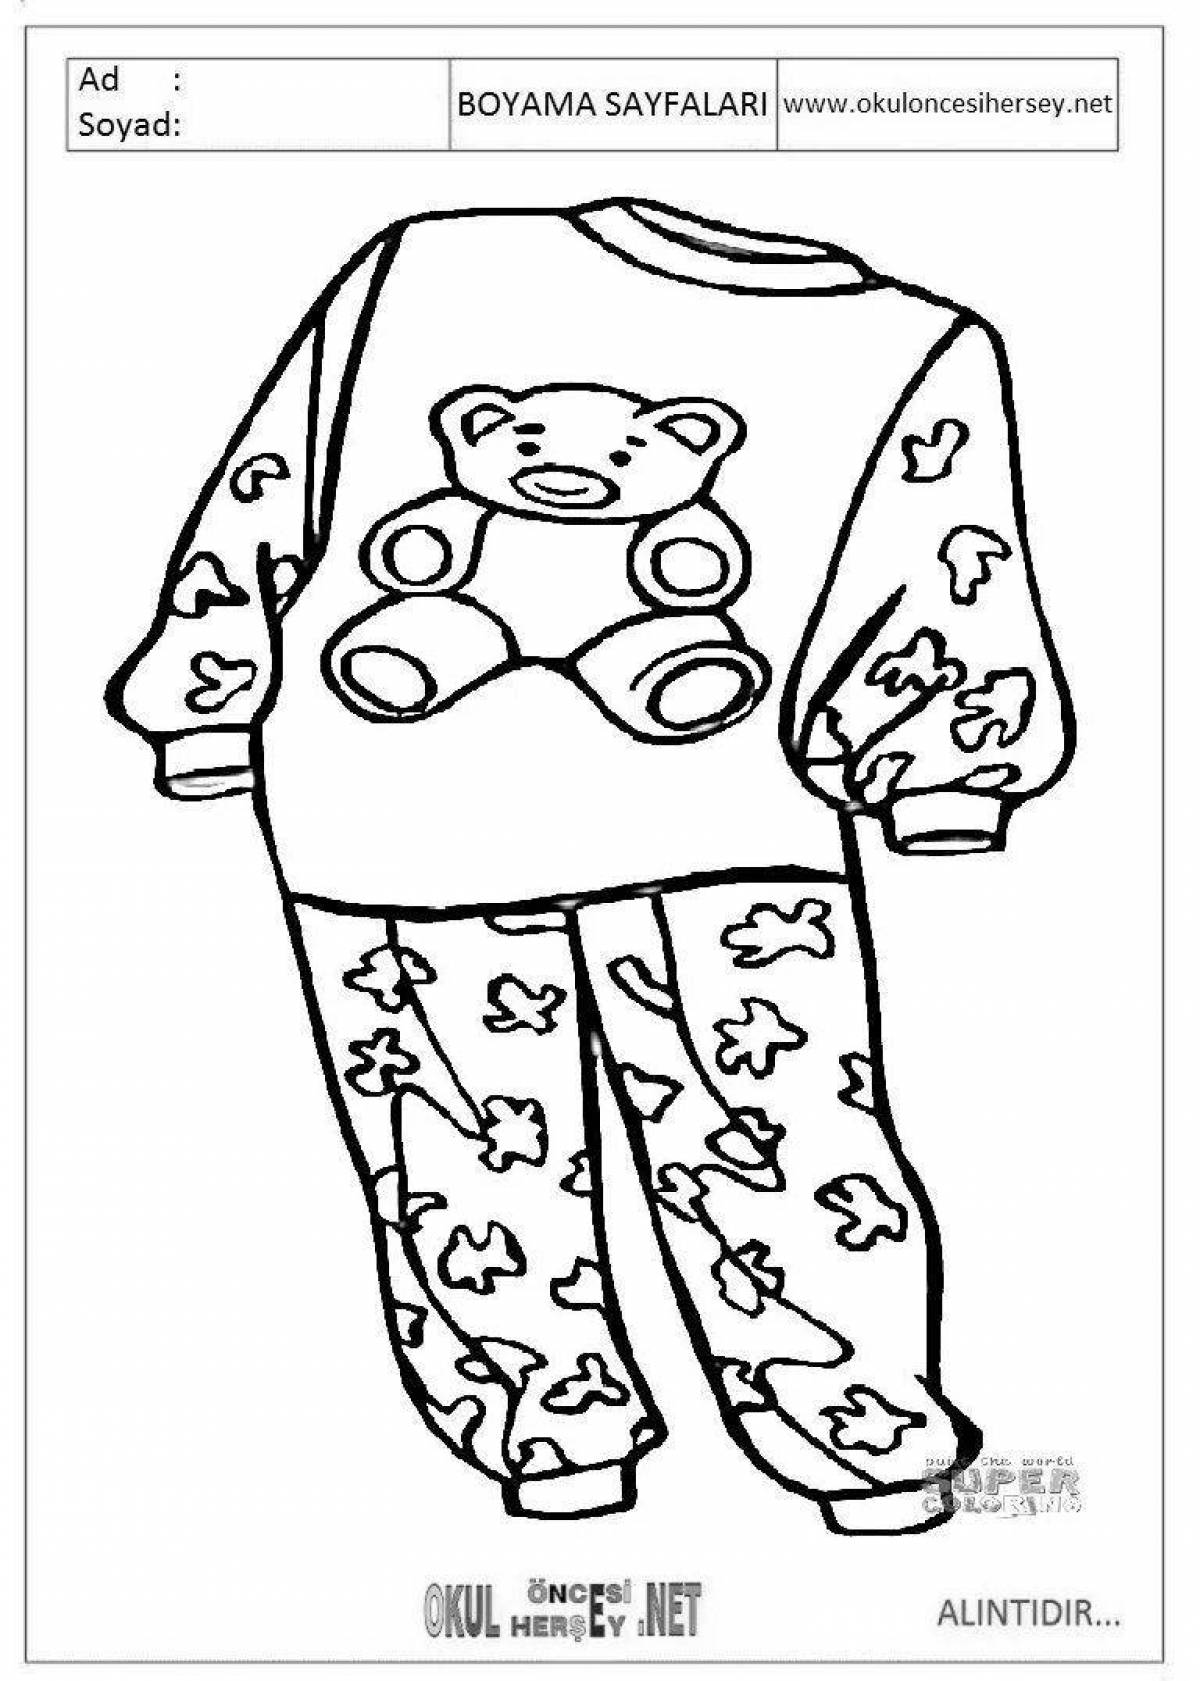 Witty pajama coloring book